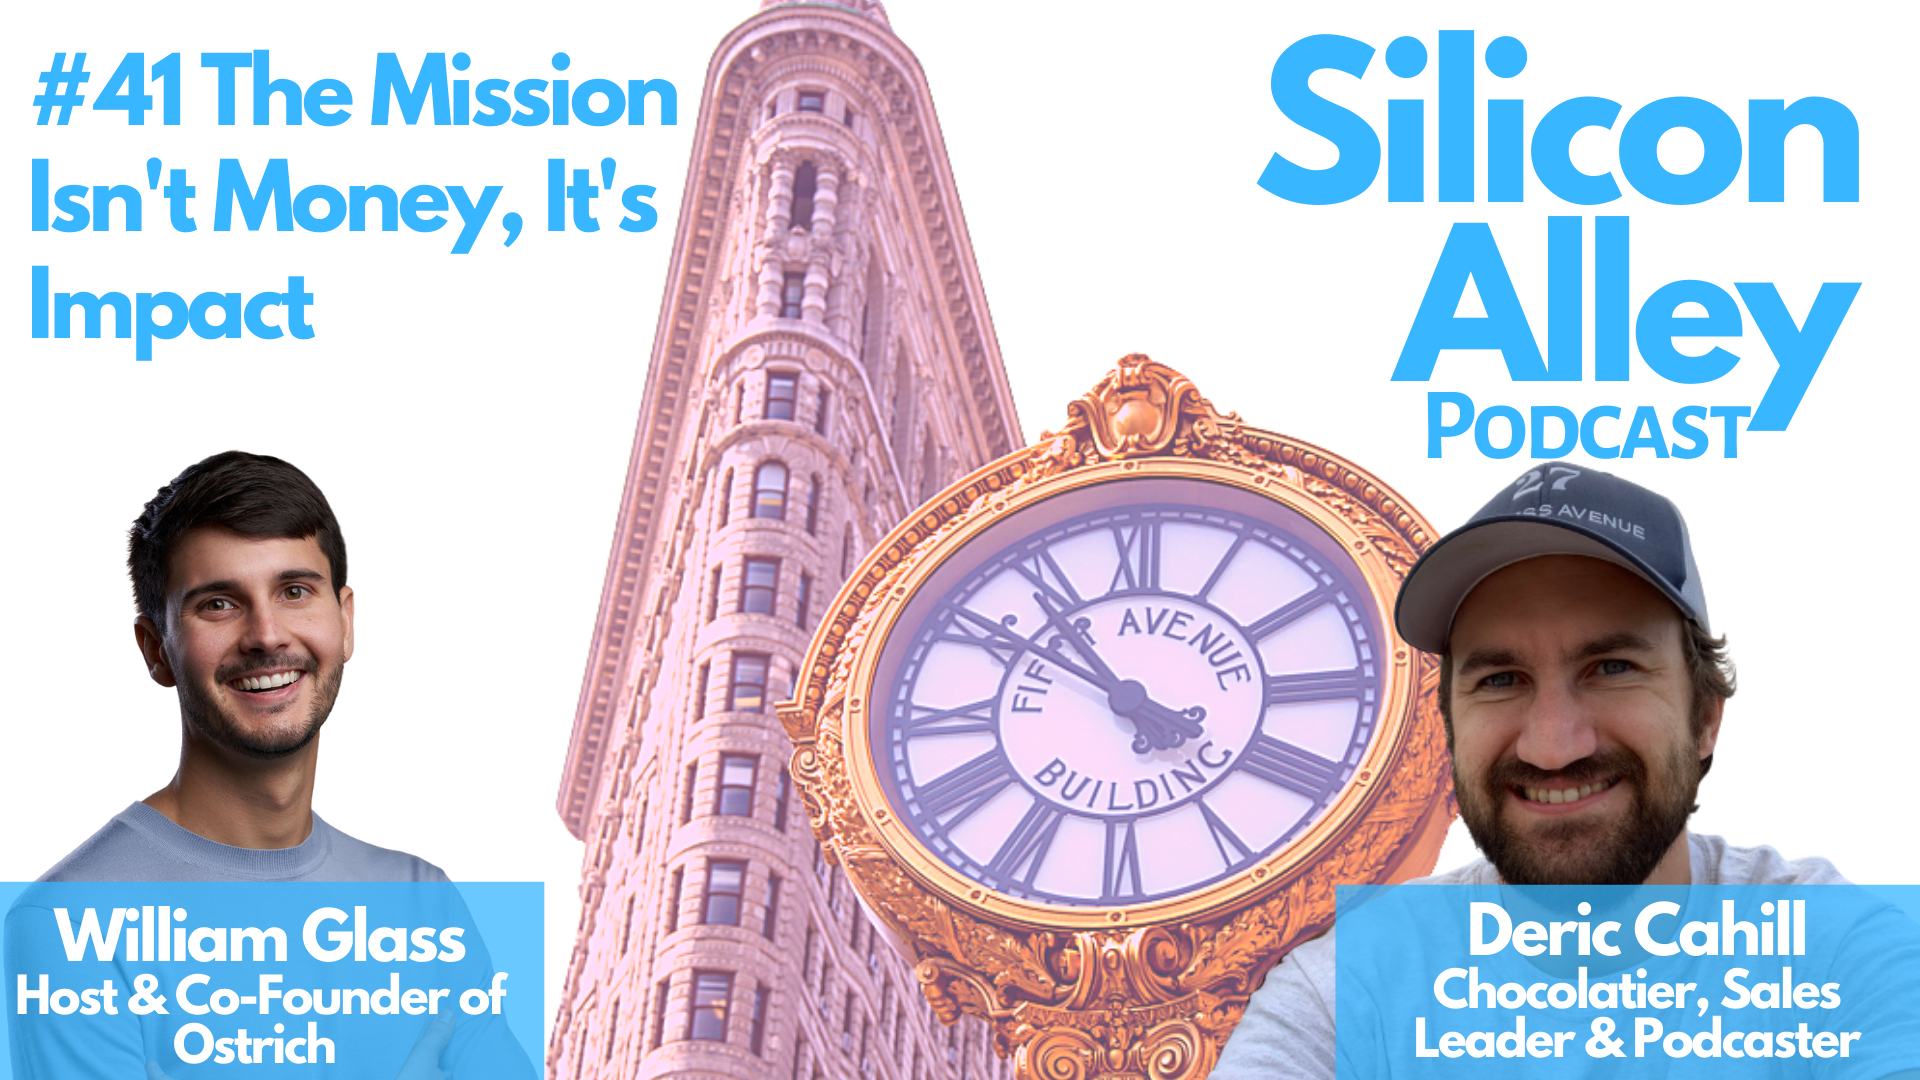 The Mission Isn't, Money It's Impact with Deric Cahill, Co-founder of Wicked Bold Chocolate & Purpenthicity Podcast | Ep 41 of the Silicon Alley Podcast